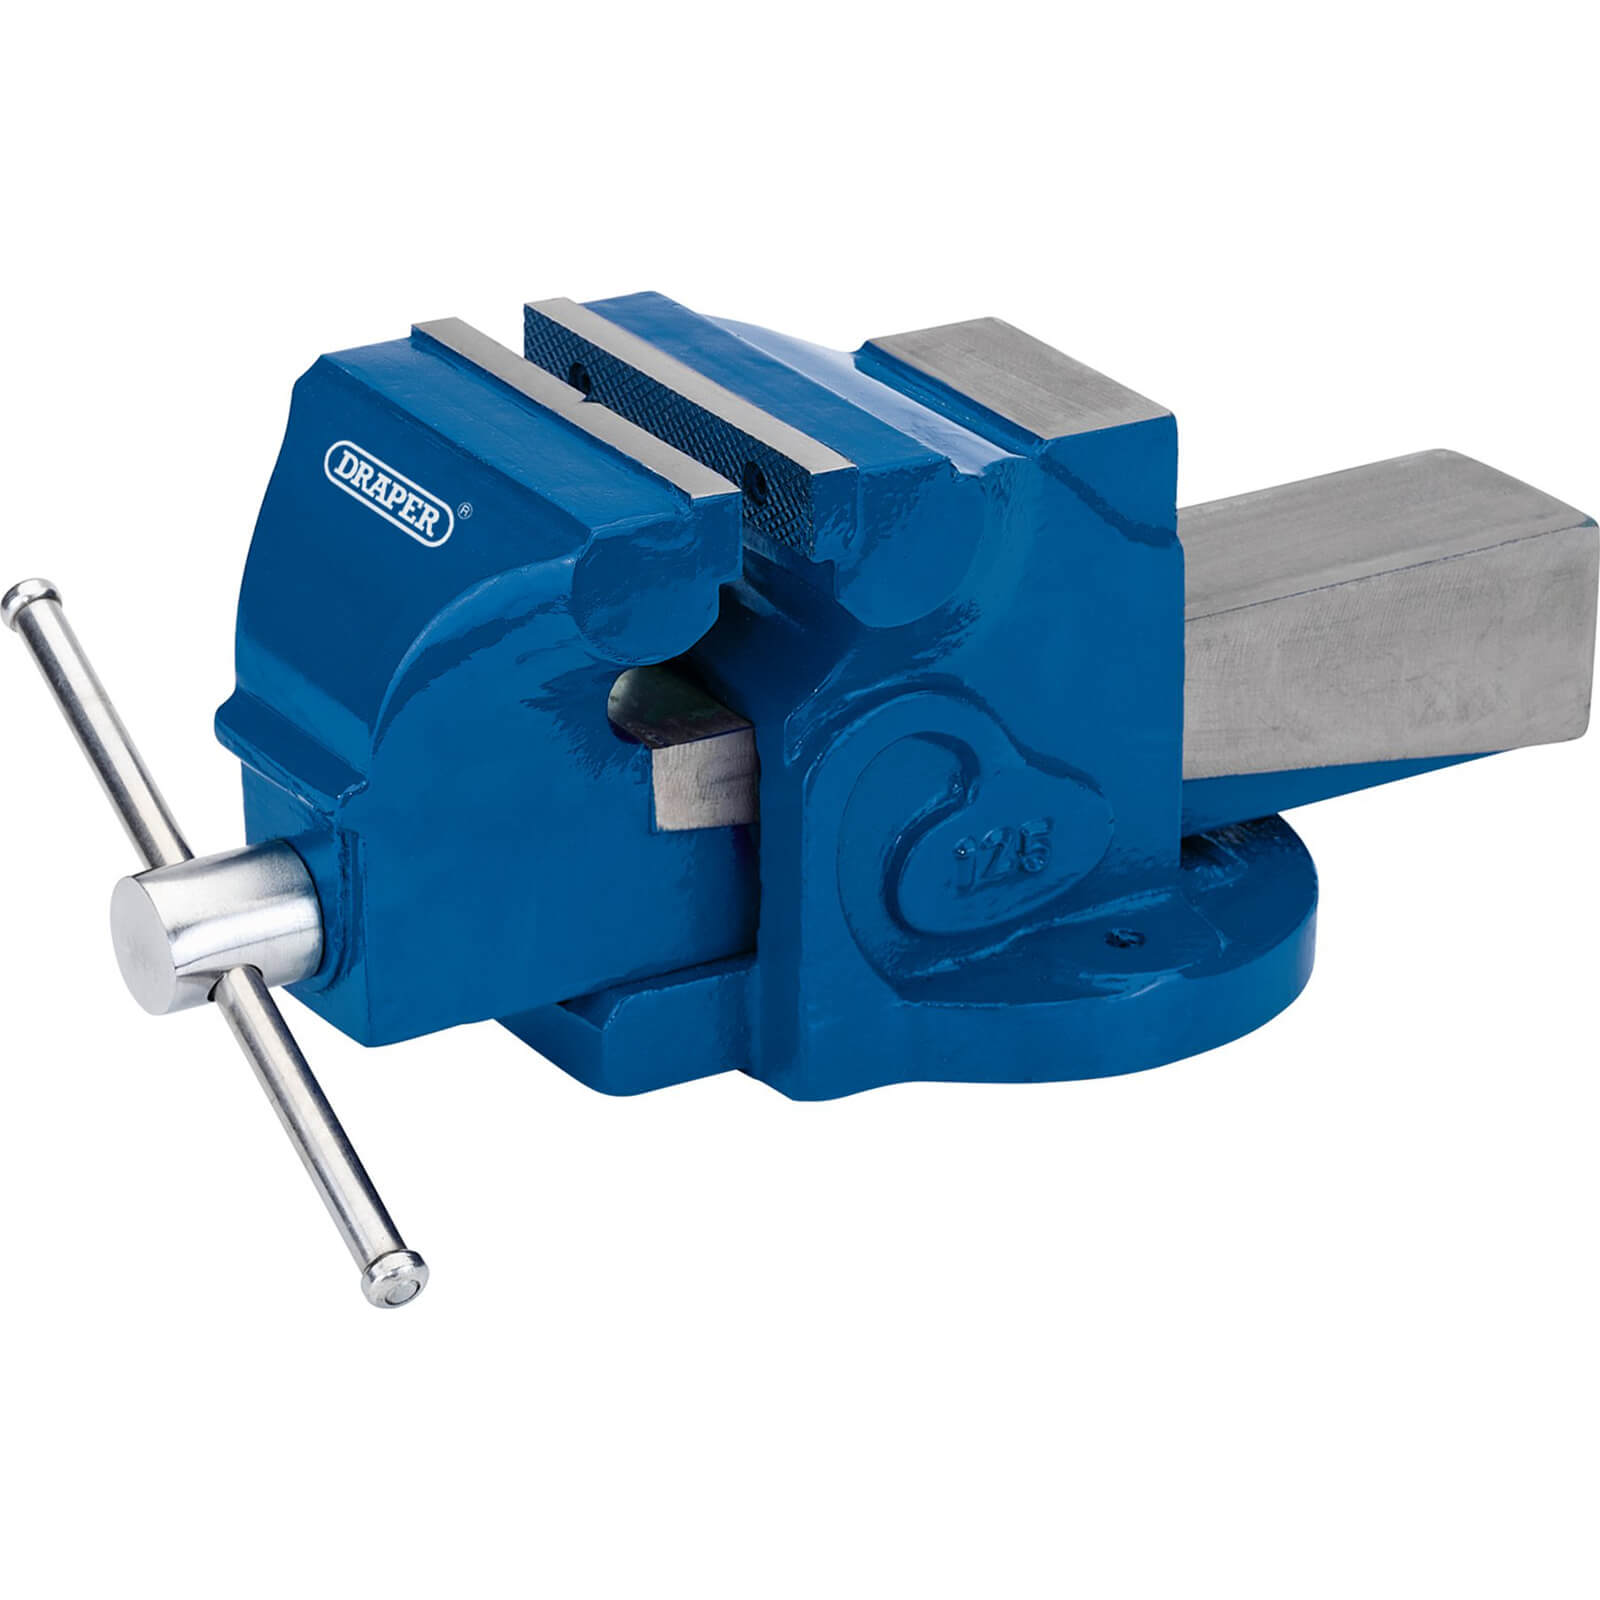 Image of Draper Engineers Bench Vice 150mm